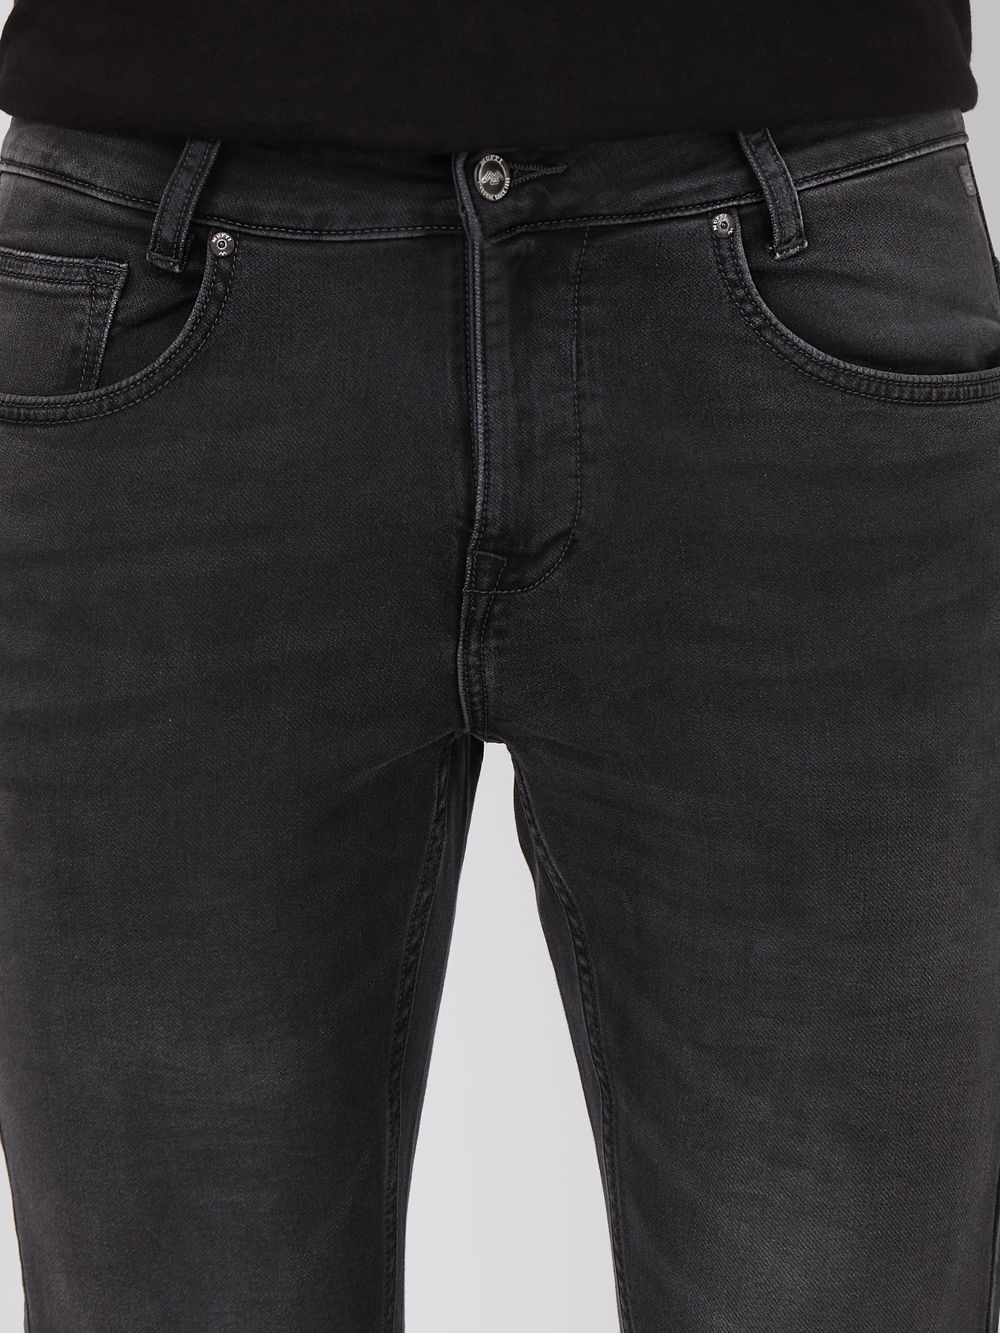 Charcoal Skinny Fit Denim Deluxe Stretch Jeans